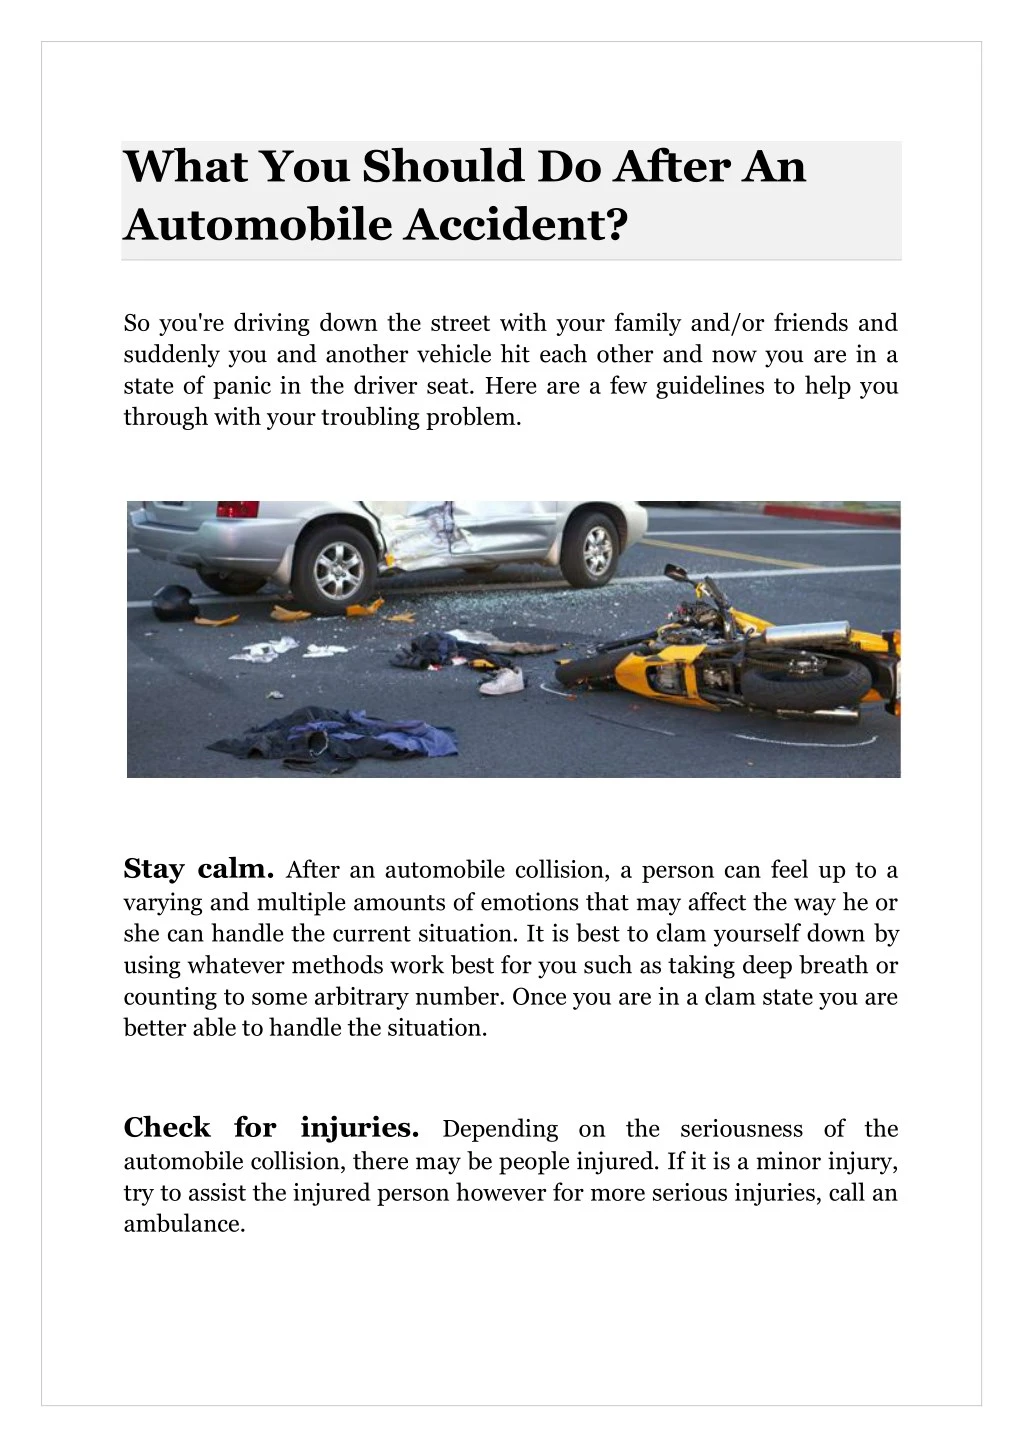 what you should do after an automobile accident